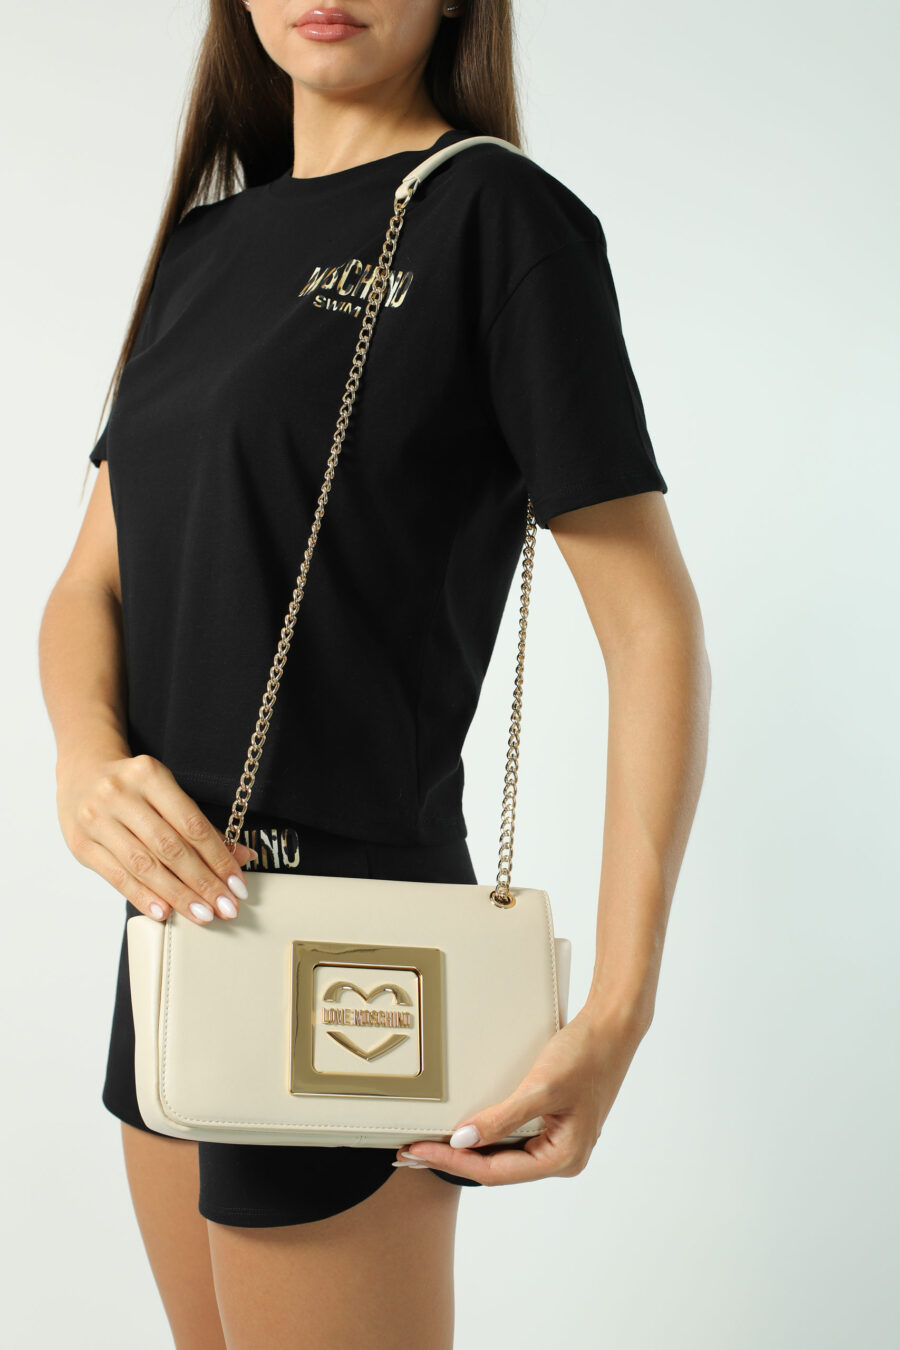 Beige shoulder bag with gold logo and chain - Photos 2385